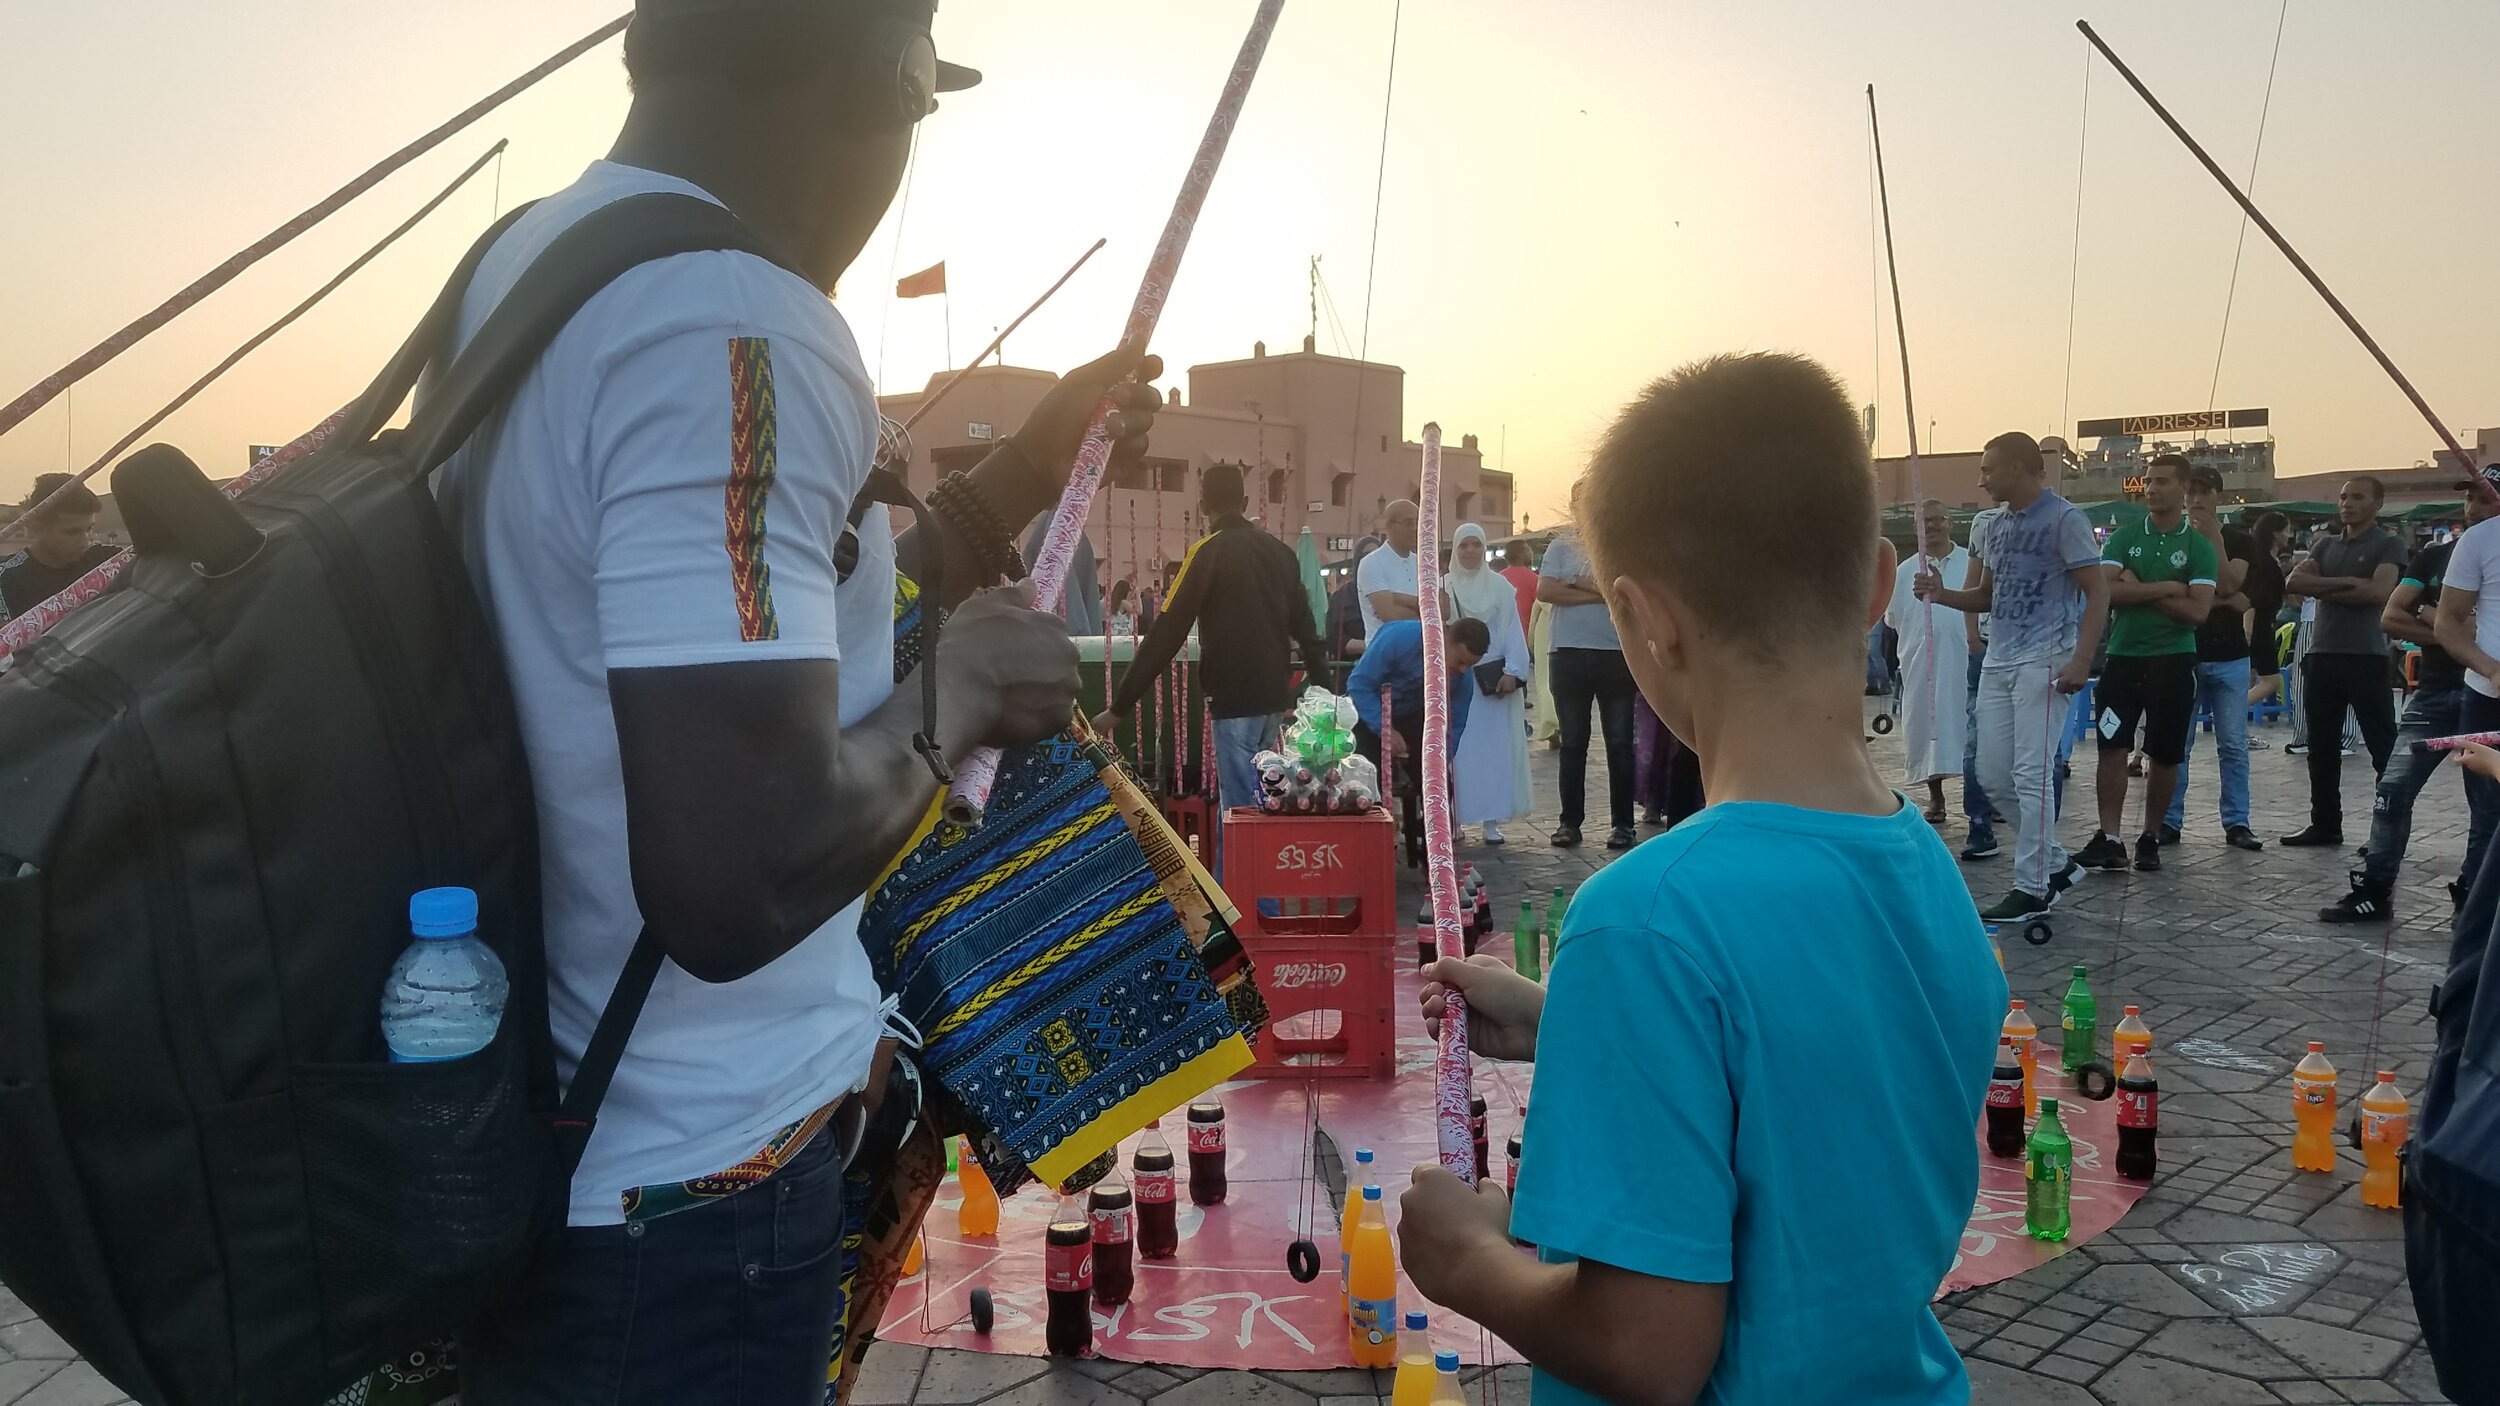 Playing in the Medina at Sunset (2019)